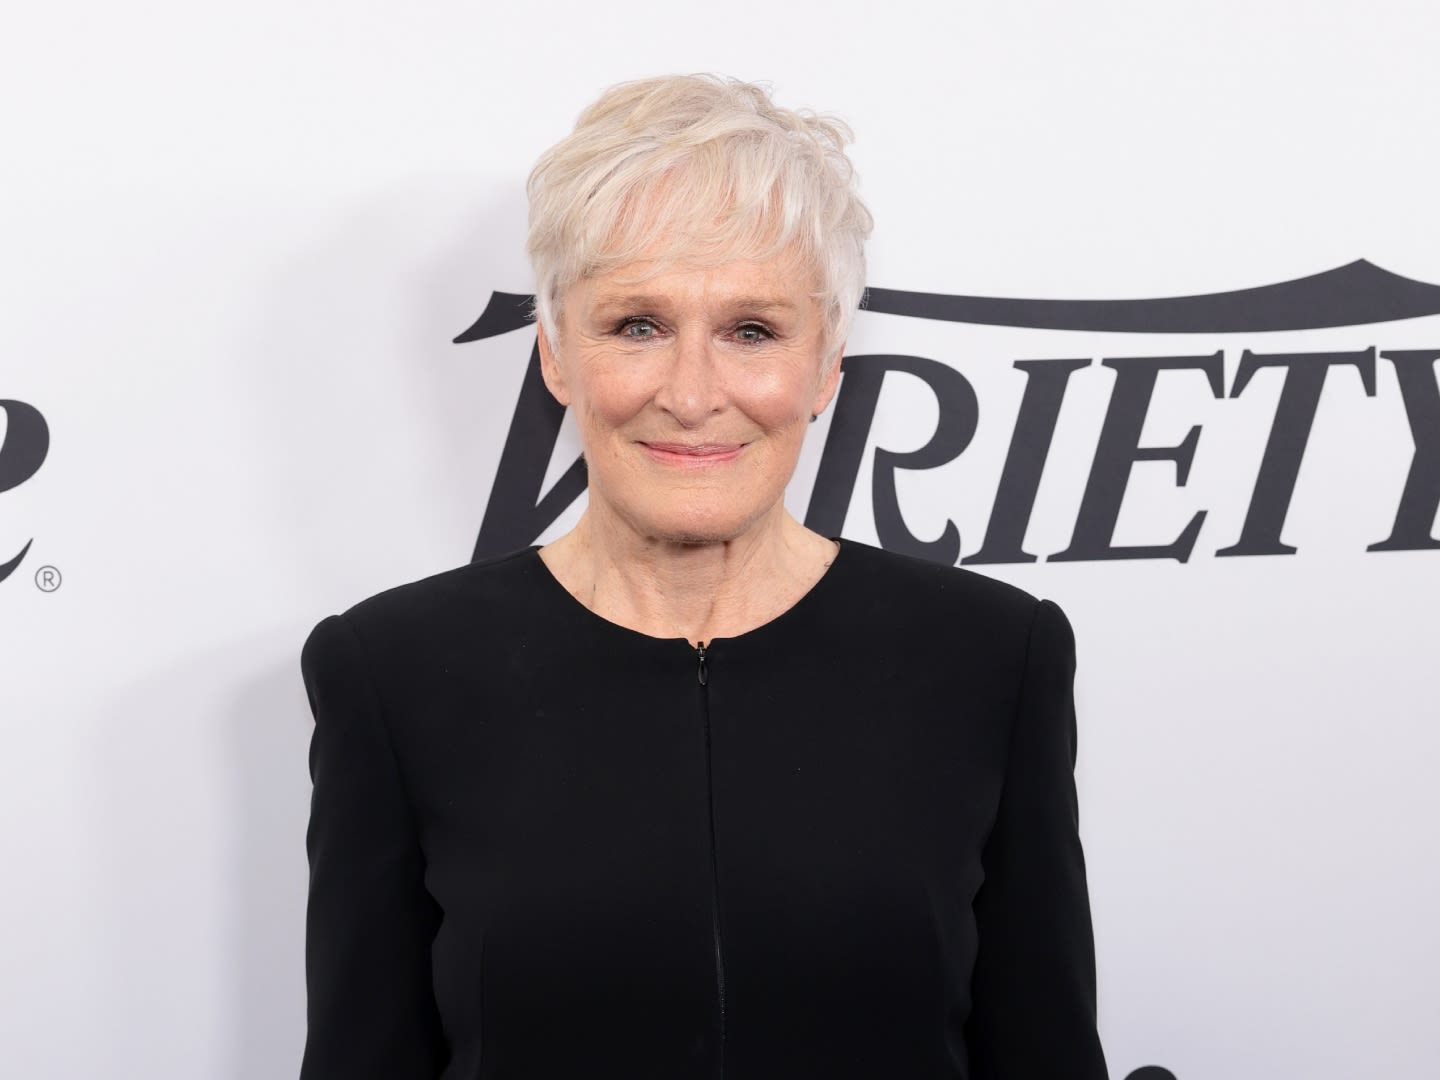 Glenn Close Explains Her Quirky Social Media Posts & Reveals Her Biggest Acting Inspirations